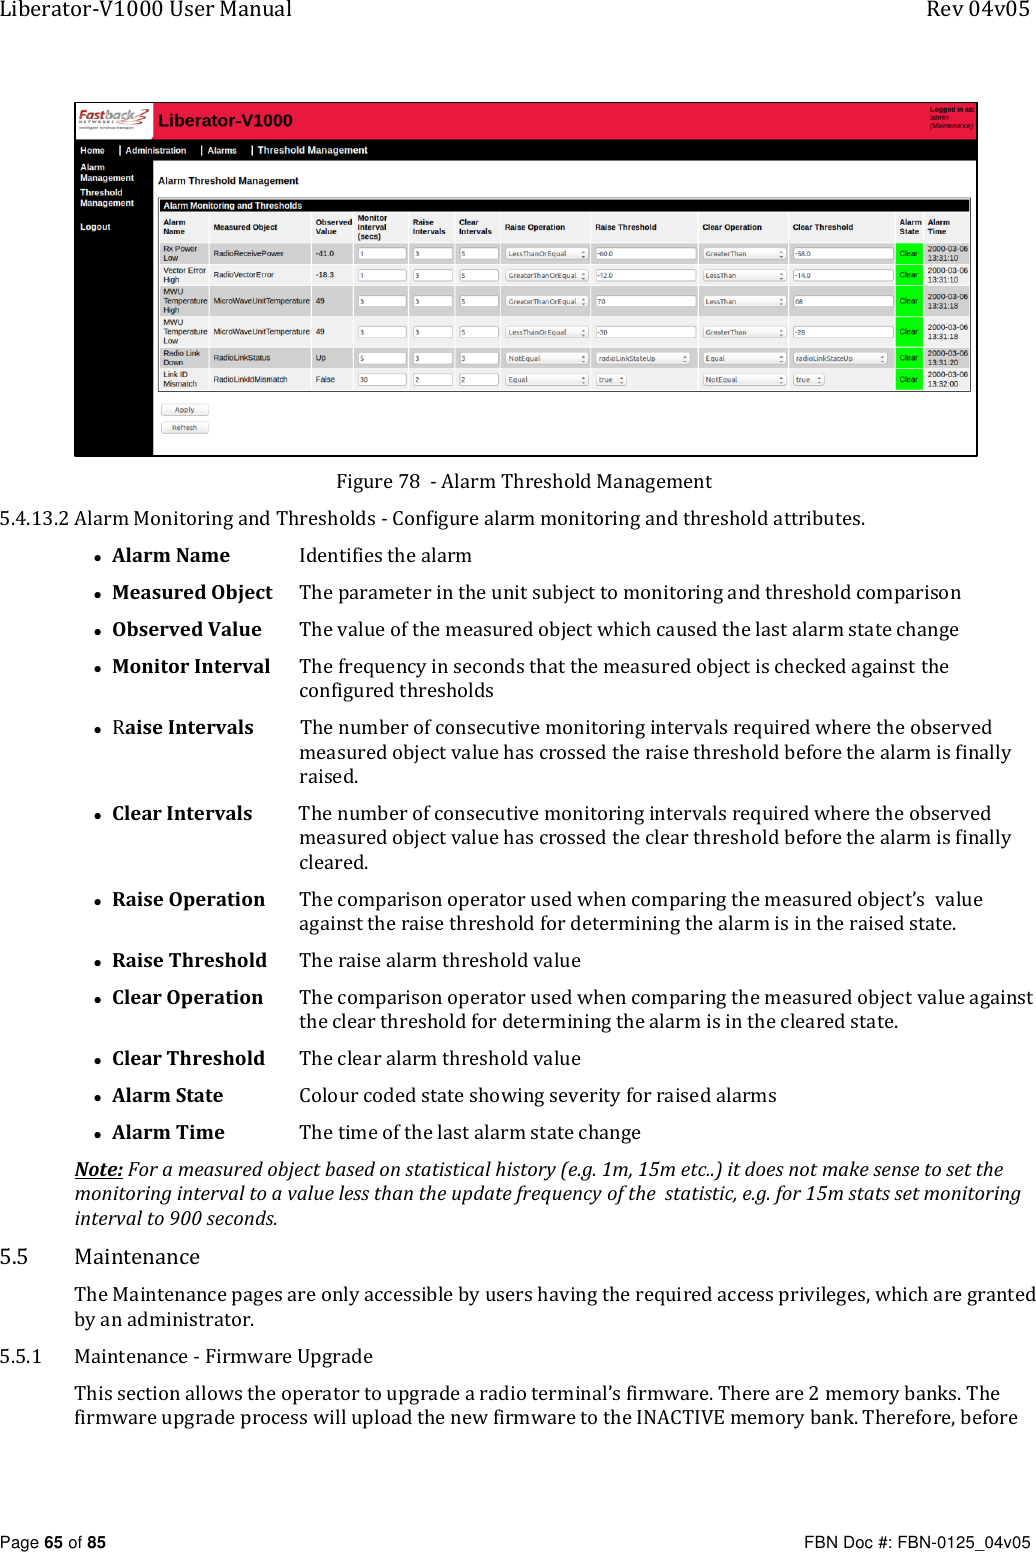 Liberator-V1000 User Manual  Rev 04v05     Page 65 of 85   FBN Doc #: FBN-0125_04v05  Figure 78  - Alarm Threshold Management 5.4.13.2 Alarm Monitoring and Thresholds - Configure alarm monitoring and threshold attributes. • Alarm Name   Identifies the alarm • Measured Object   The parameter in the unit subject to monitoring and threshold comparison • Observed Value   The value of the measured object which caused the last alarm state change • Monitor Interval   The frequency in seconds that the measured object is checked against the configured thresholds • Raise Intervals          The number of consecutive monitoring intervals required where the observed measured object value has crossed the raise threshold before the alarm is finally raised.  • Clear Intervals          The number of consecutive monitoring intervals required where the observed measured object value has crossed the clear threshold before the alarm is finally cleared.  • Raise Operation   The comparison operator used when comparing the measured object’s  value against the raise threshold for determining the alarm is in the raised state.  • Raise Threshold   The raise alarm threshold value   • Clear Operation   The comparison operator used when comparing the measured object value against the clear threshold for determining the alarm is in the cleared state.  • Clear Threshold   The clear alarm threshold value   • Alarm State   Colour coded state showing severity for raised alarms • Alarm Time   The time of the last alarm state change Note: For a measured object based on statistical history (e.g. 1m, 15m etc..) it does not make sense to set the monitoring interval to a value less than the update frequency of the  statistic, e.g. for 15m stats set monitoring interval to 900 seconds. 5.5 Maintenance The Maintenance pages are only accessible by users having the required access privileges, which are granted by an administrator. 5.5.1 Maintenance - Firmware Upgrade This section allows the operator to upgrade a radio terminal’s firmware. There are 2 memory banks. The firmware upgrade process will upload the new firmware to the INACTIVE memory bank. Therefore, before 